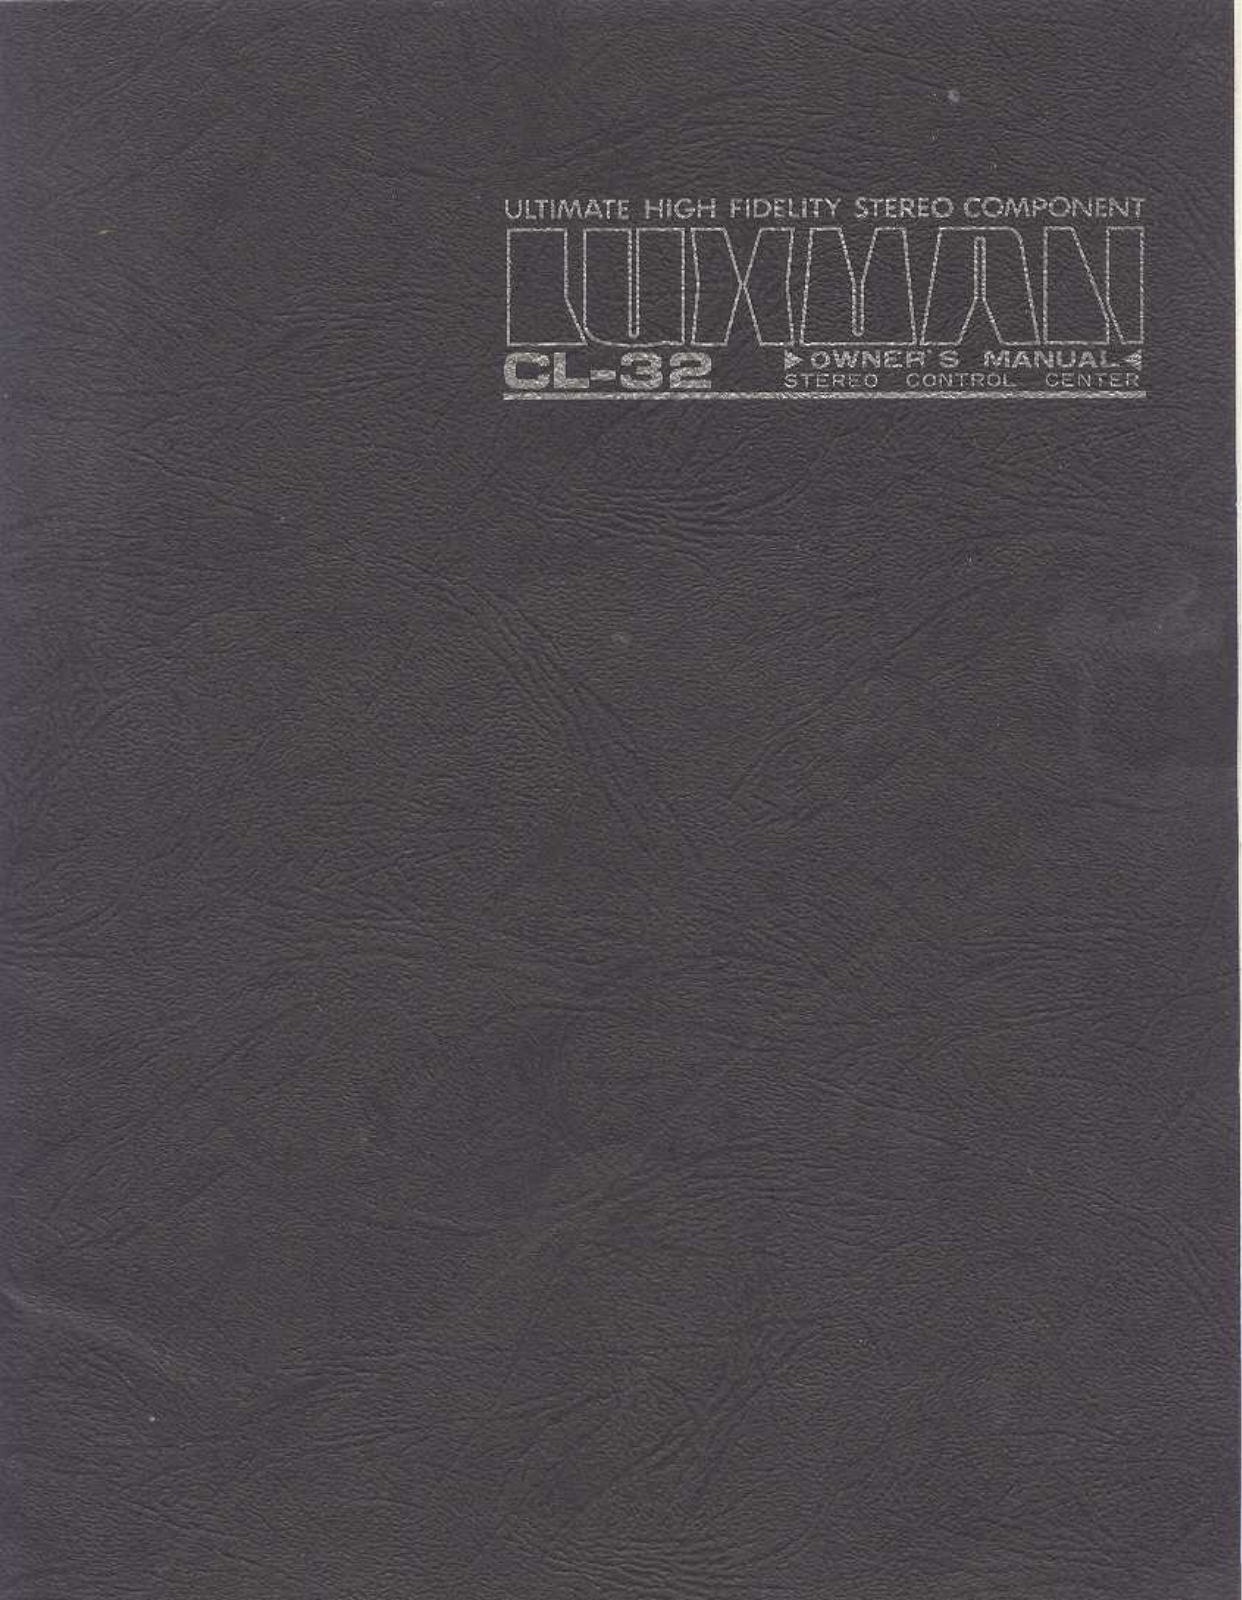 Luxman CL-32 Owners manual